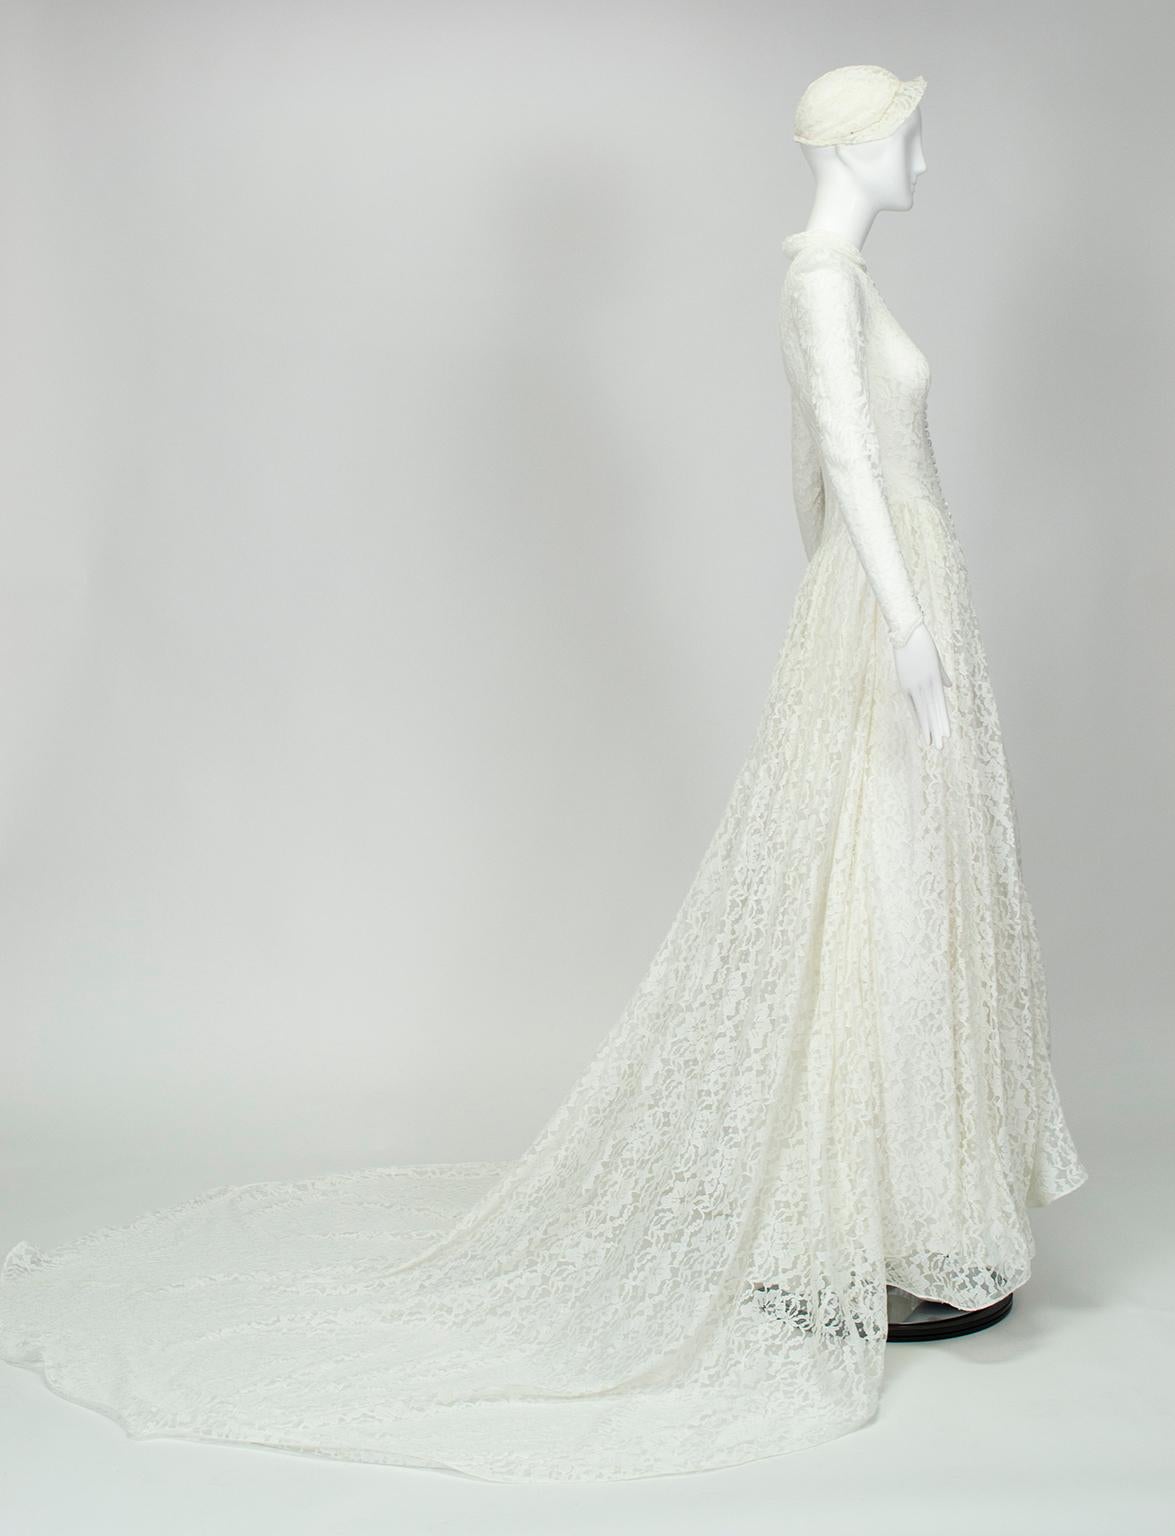 An alluring, yet fully-covered gown for those brides who seek modesty without looking mousy, this wedding gown was custom-made for a 1951 bride who valued discretion and beauty in equal measure. Though this gown pre-dates Kelly's, it is strikingly